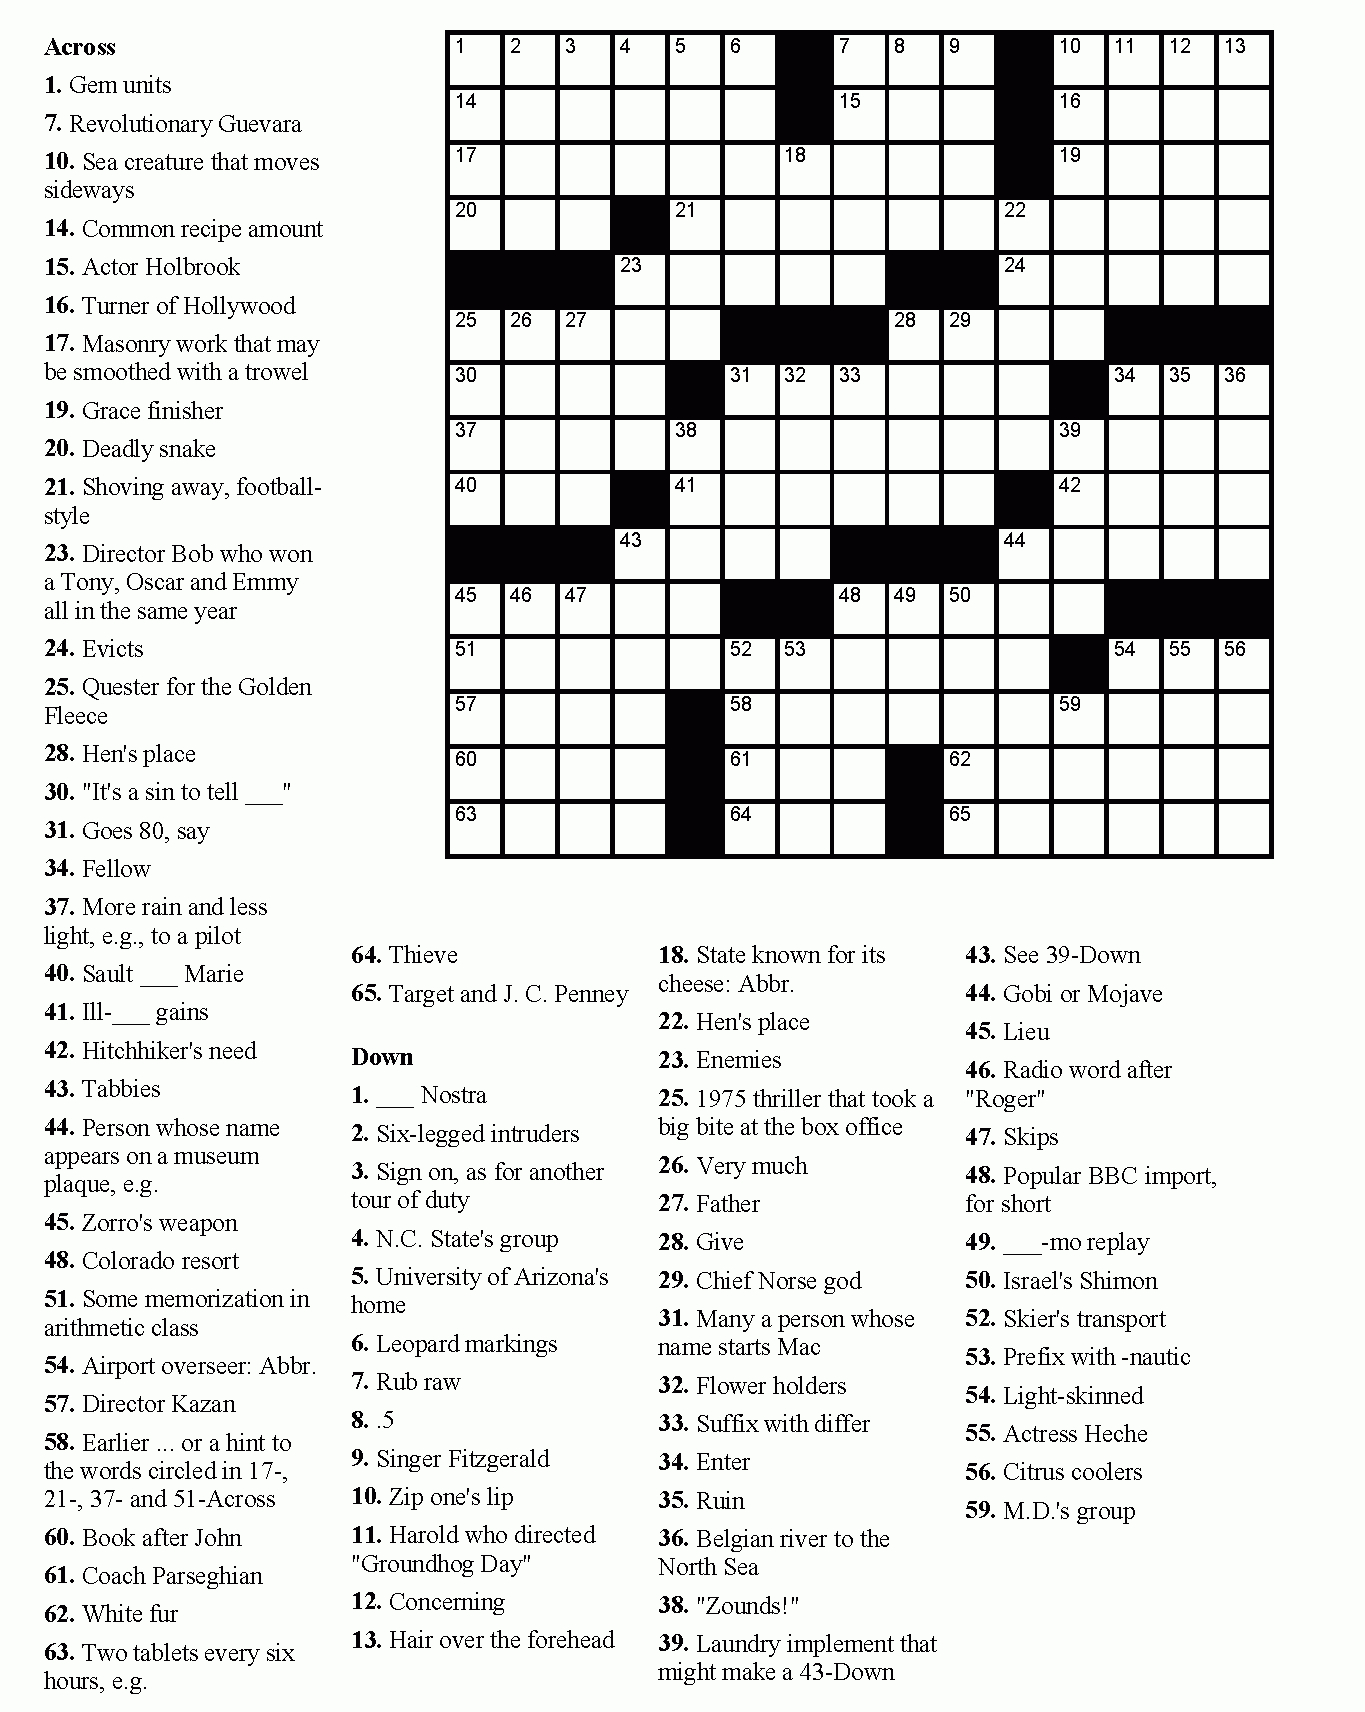 Free Printable Crossword Puzzles Easy For Adults | My Board | Free - Printable Crossword Puzzles #1